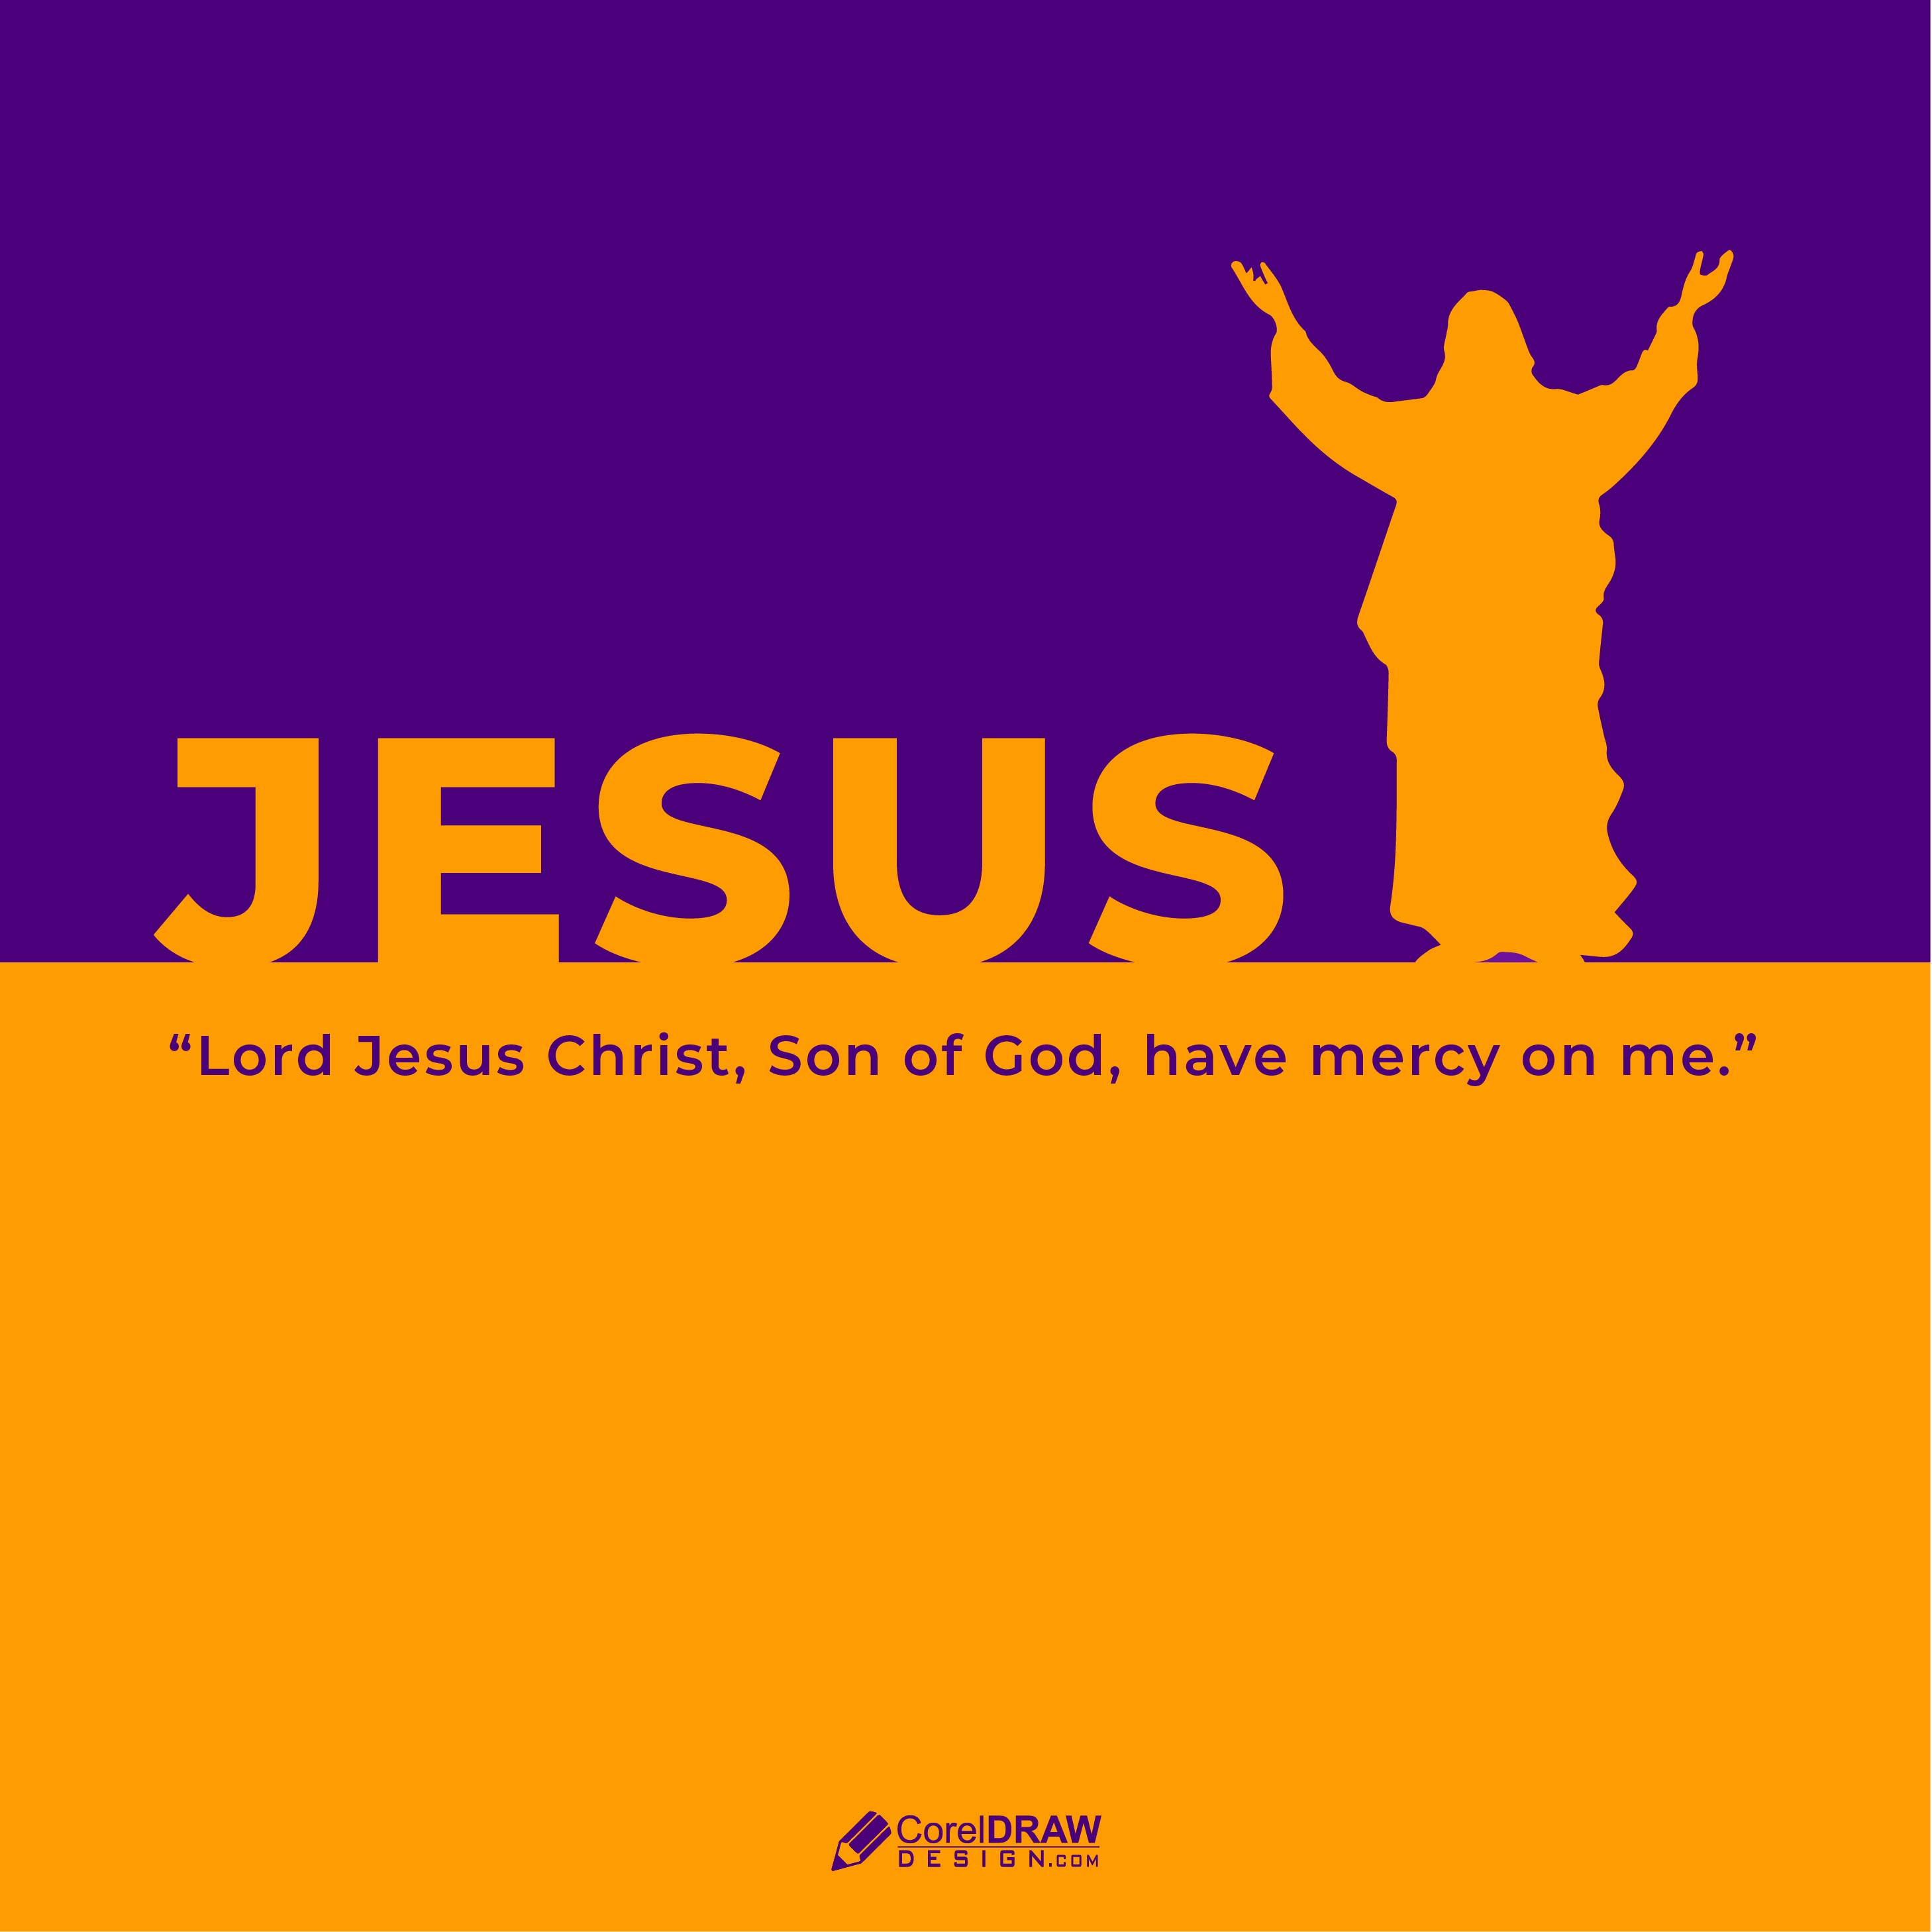 Abstract Jesus Blessings prayer vector